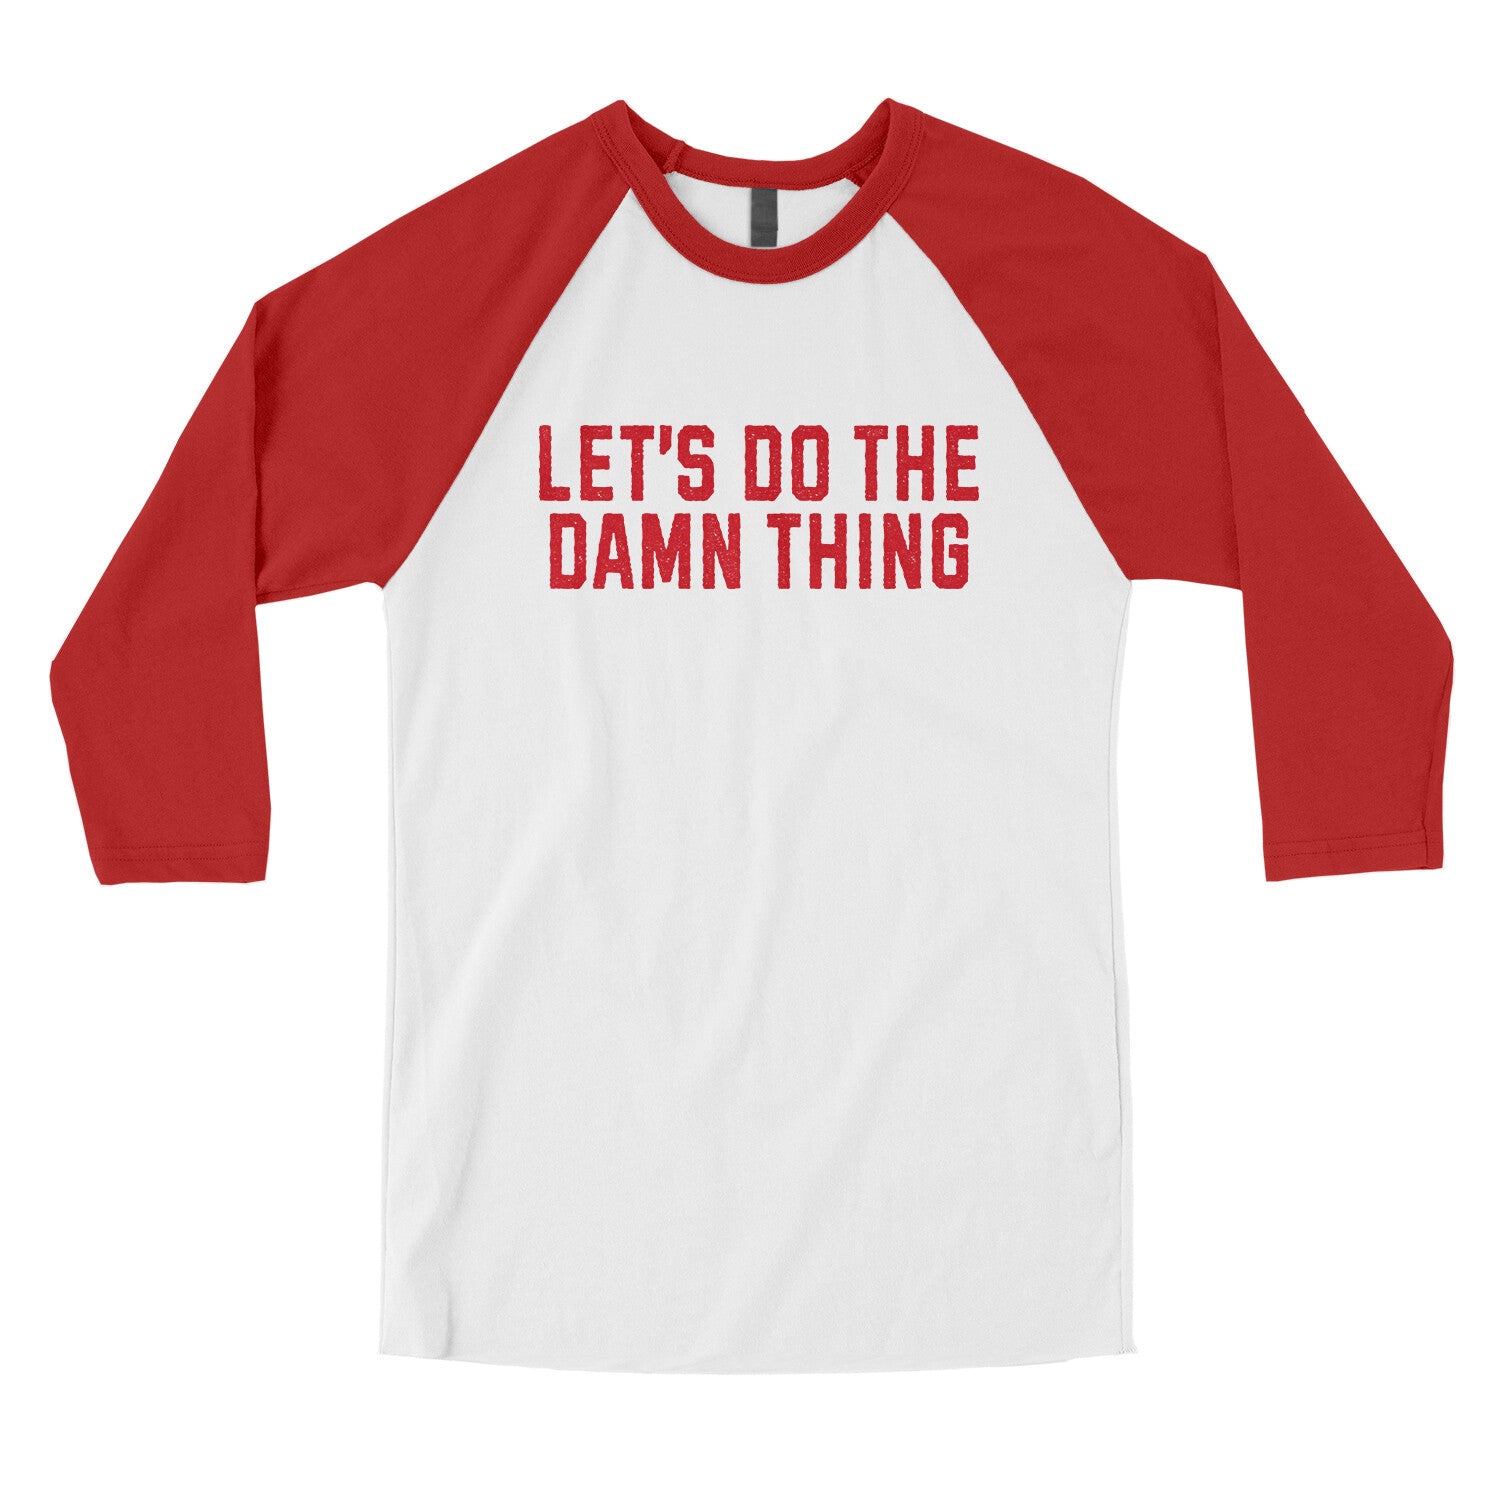 Let’s Do the Damn Thing in White with Red Color